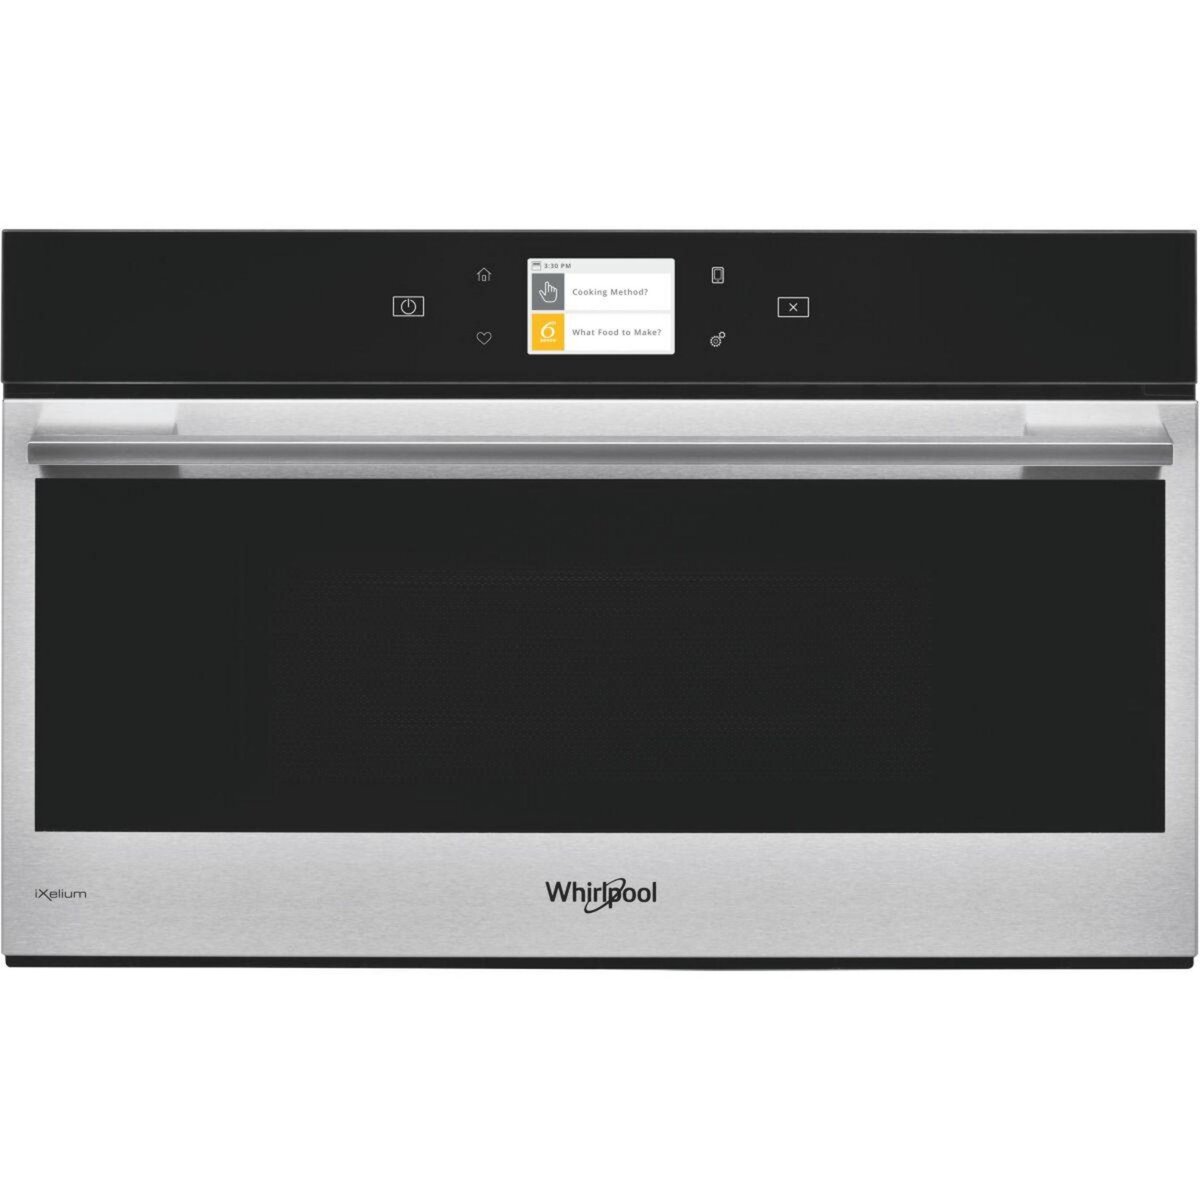 Whirlpool Micro ondes combiné encastrable W9MD260IXL